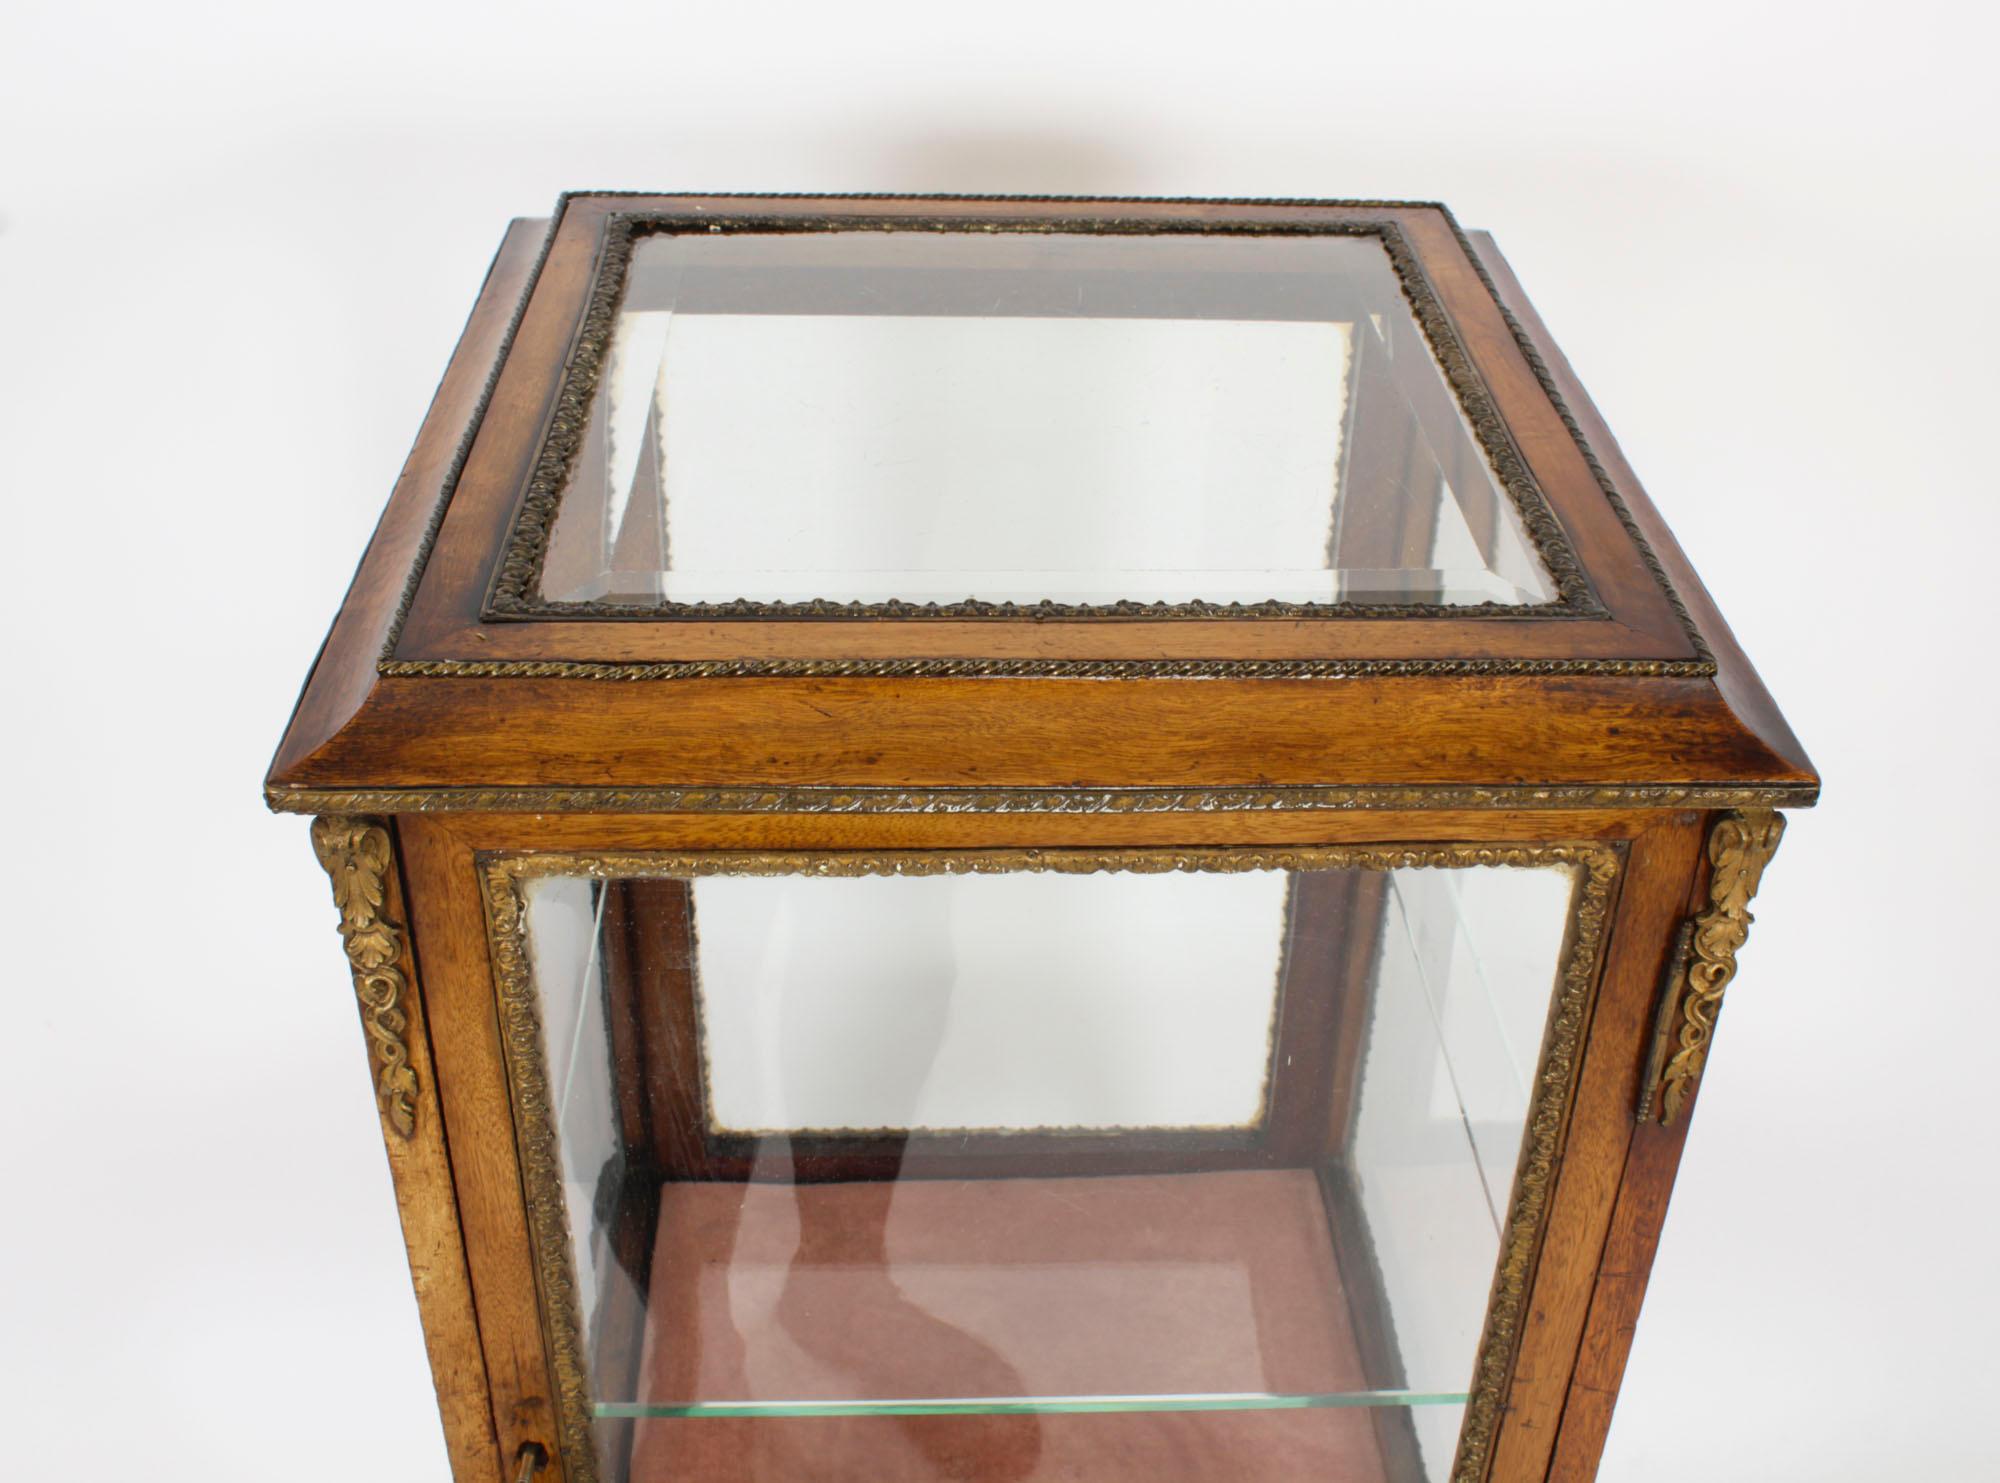 Antique Square Ormolu Mounted Vitrine Display Cabinet 19th Century In Good Condition For Sale In London, GB